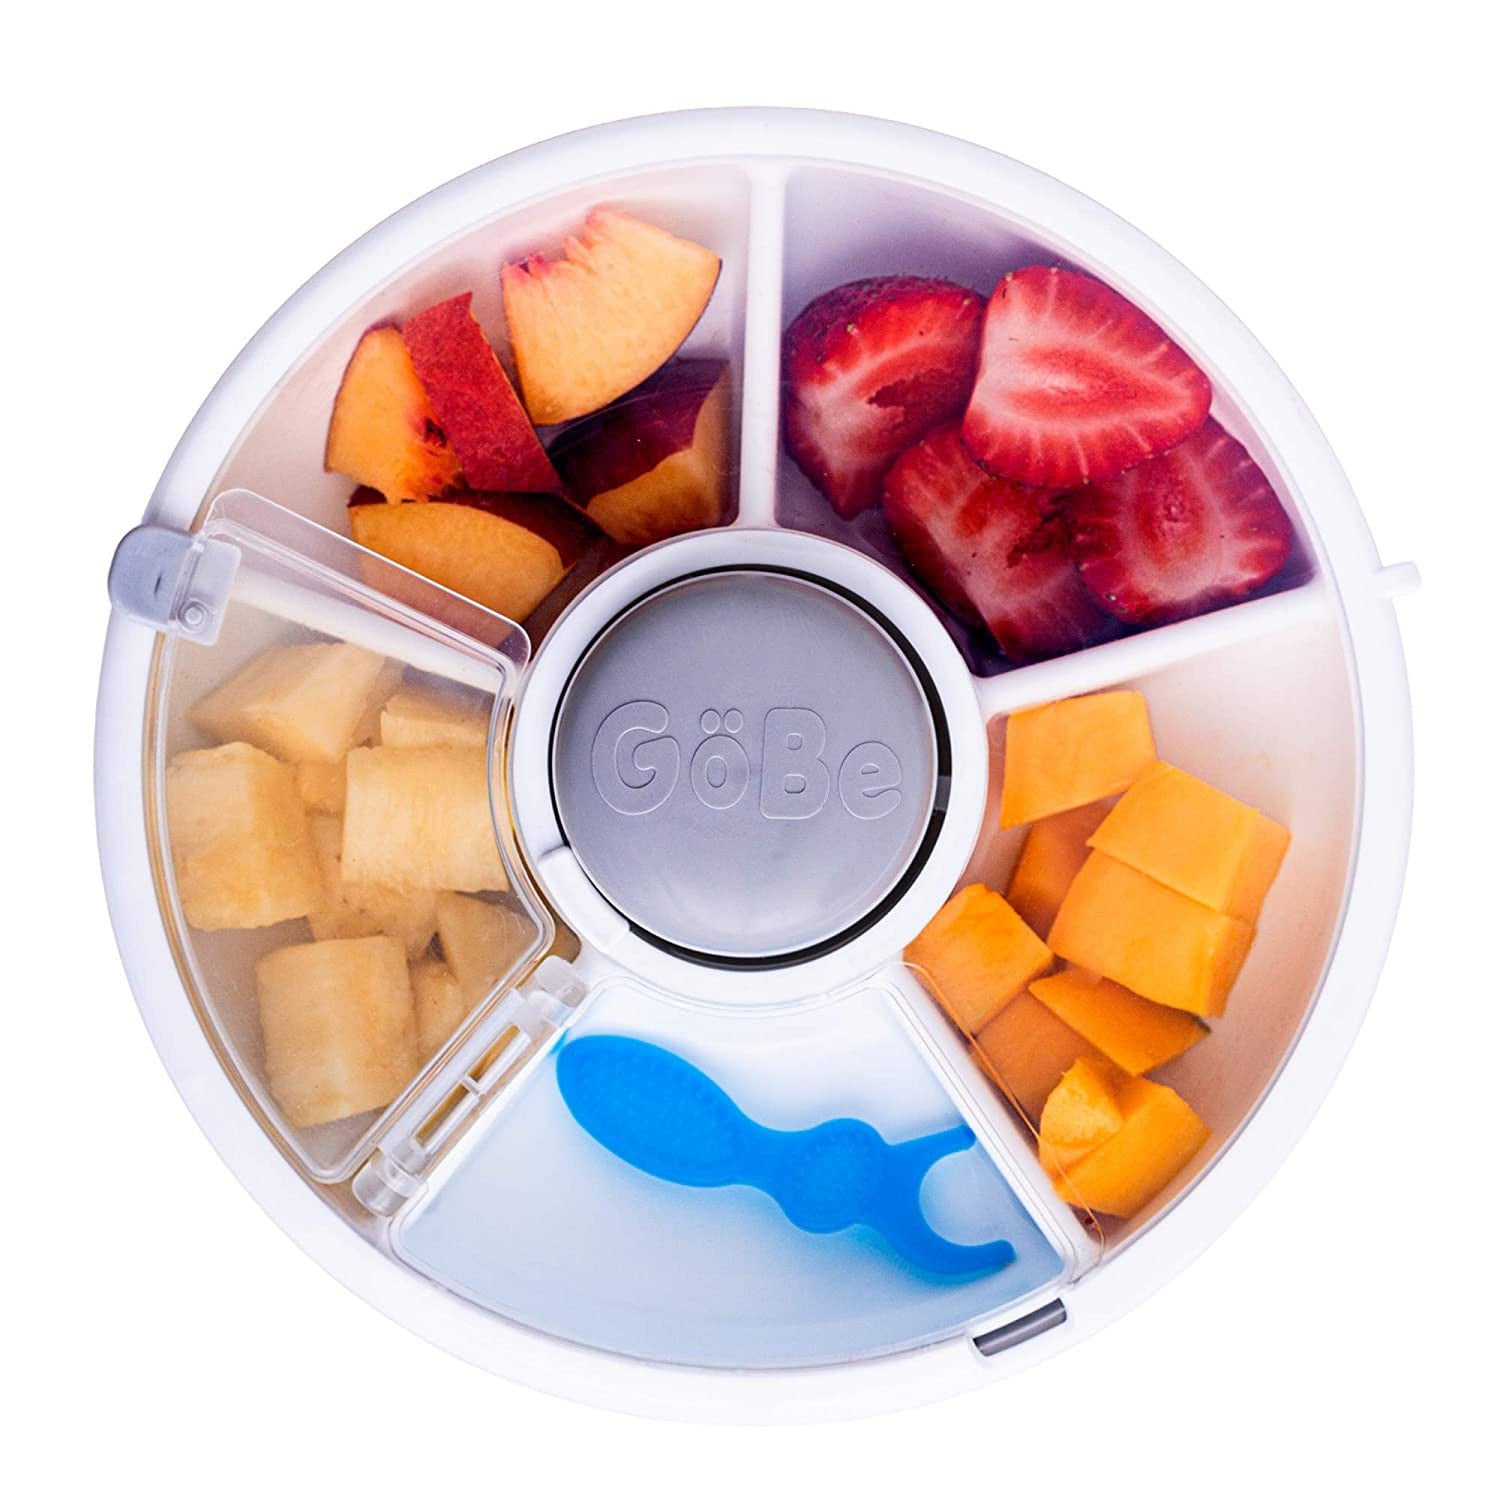 Gobe snack and meal spinner plate - Grey - Small